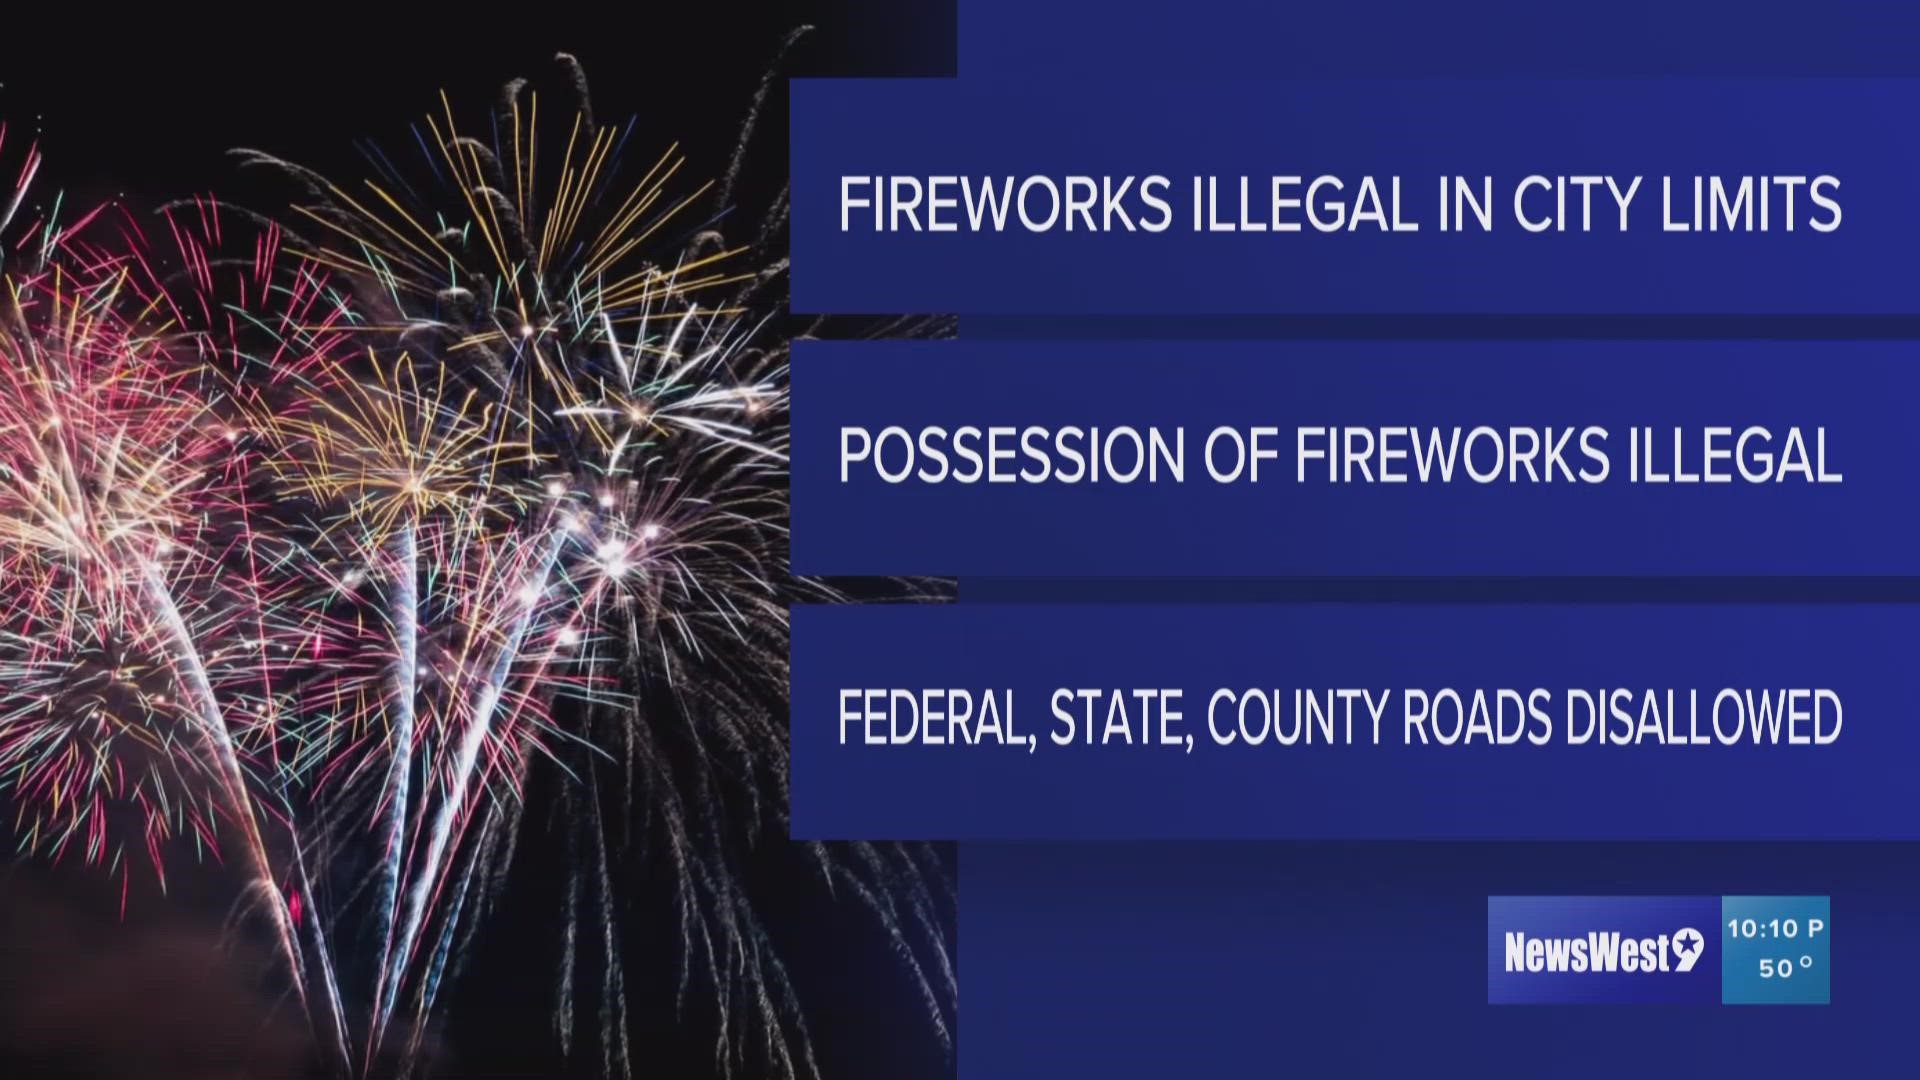 In Midland and Odessa, it is illegal to even possess fireworks in city limits.